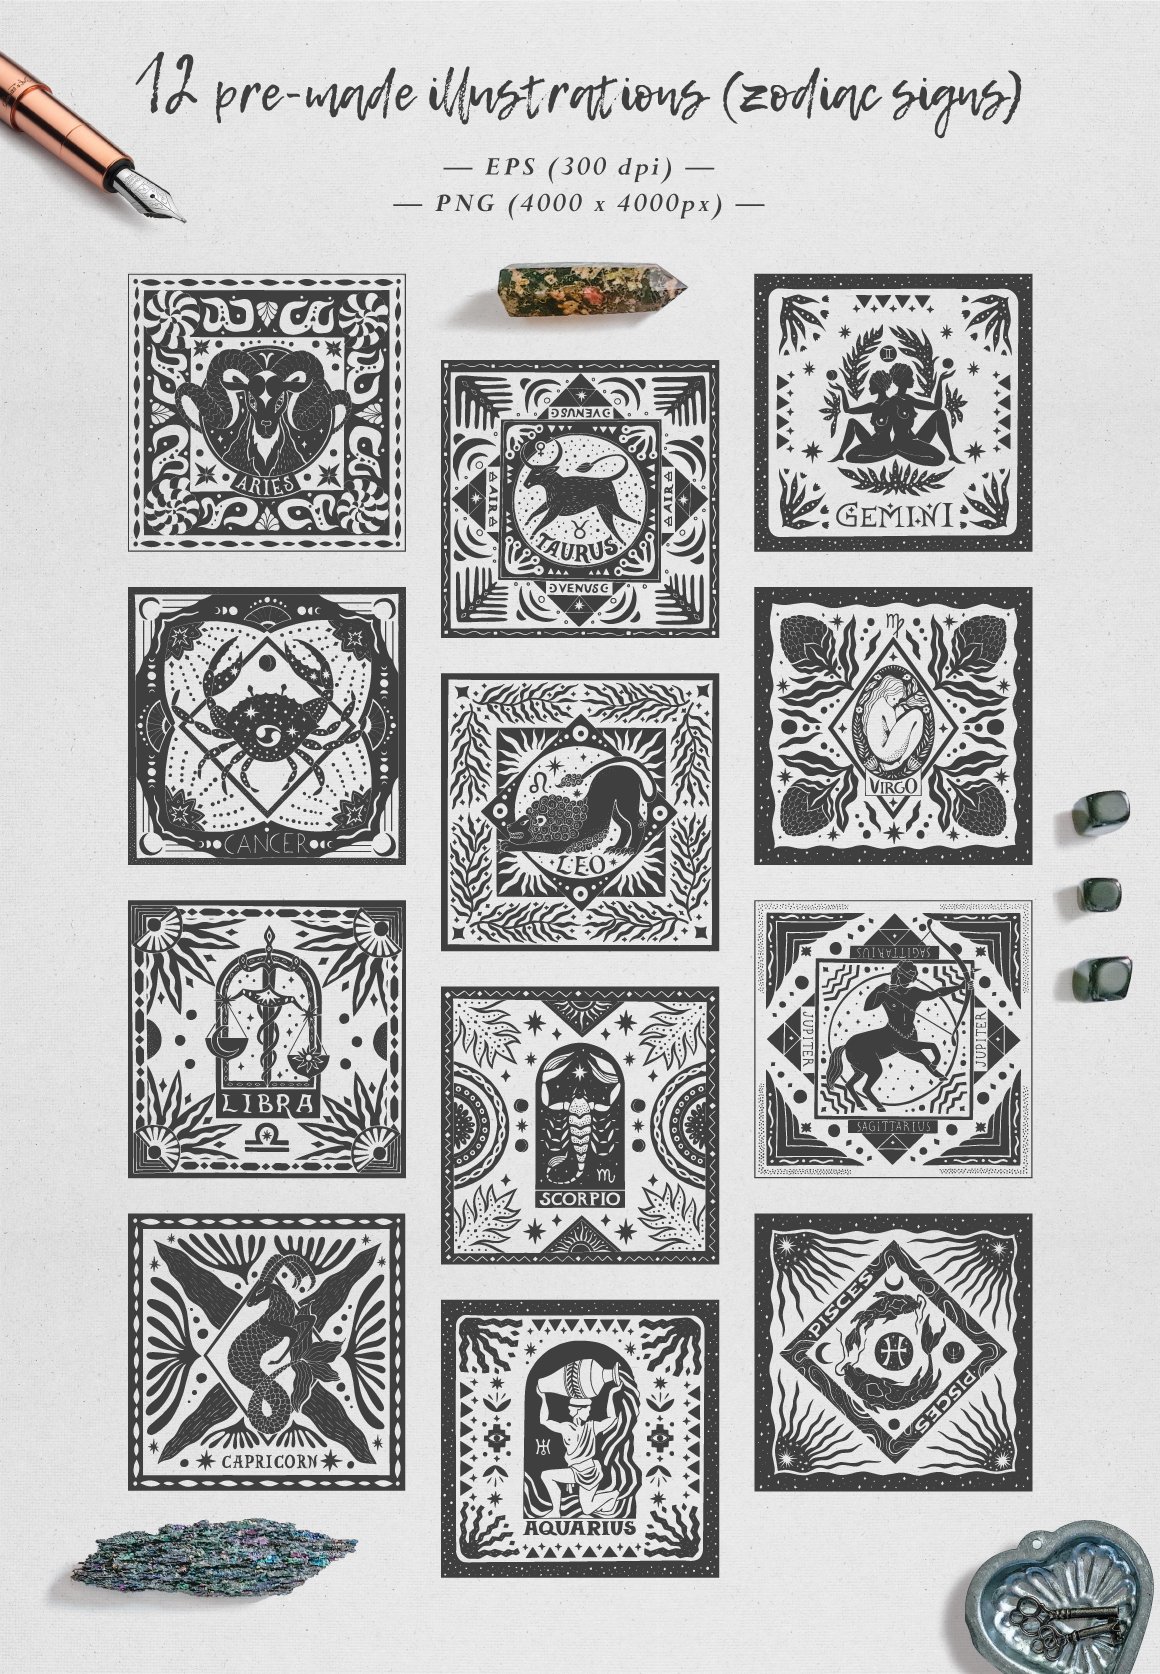 Images of cards with signs of the zodiac.